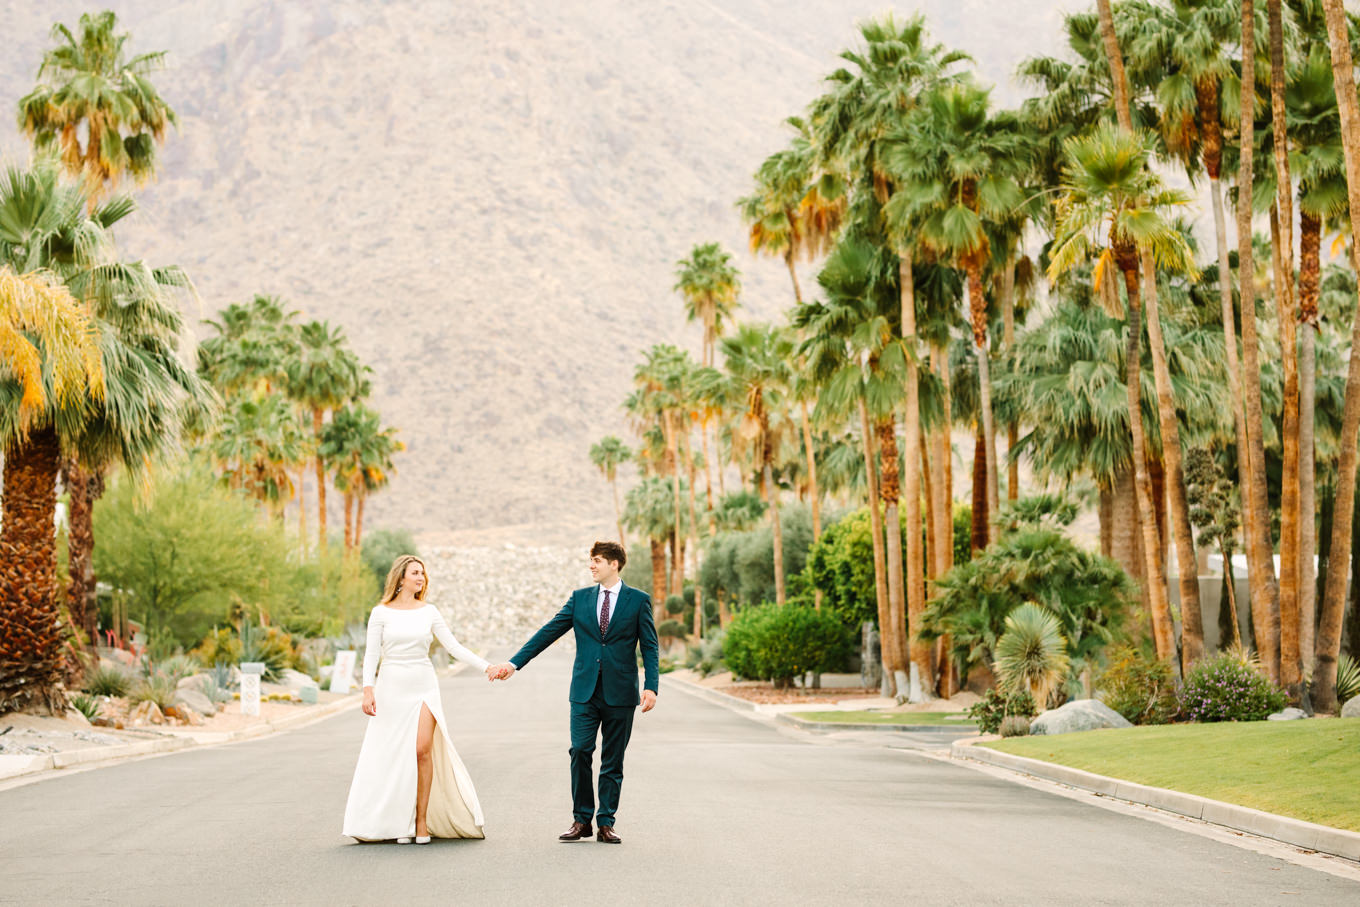 Bride and groom walking in palm tree lined street | Colorful jewel tone Palm Springs elopement | Fresh and colorful photography for fun-loving couples in Southern California | #colorfulelopement #palmspringselopement #elopementphotography #palmspringswedding Source: Mary Costa Photography | Los Angeles